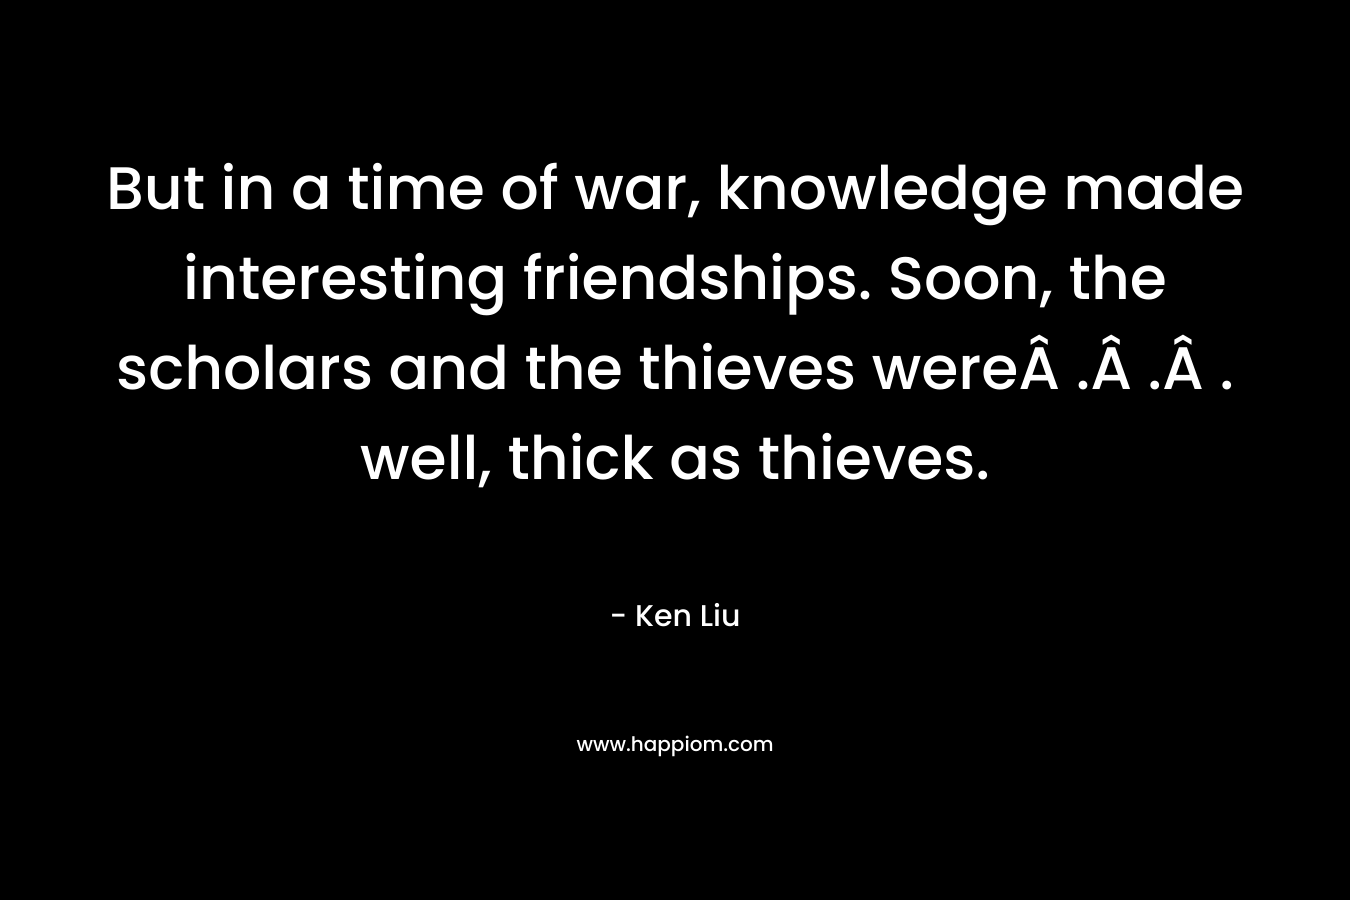 But in a time of war, knowledge made interesting friendships. Soon, the scholars and the thieves wereÂ .Â .Â . well, thick as thieves.